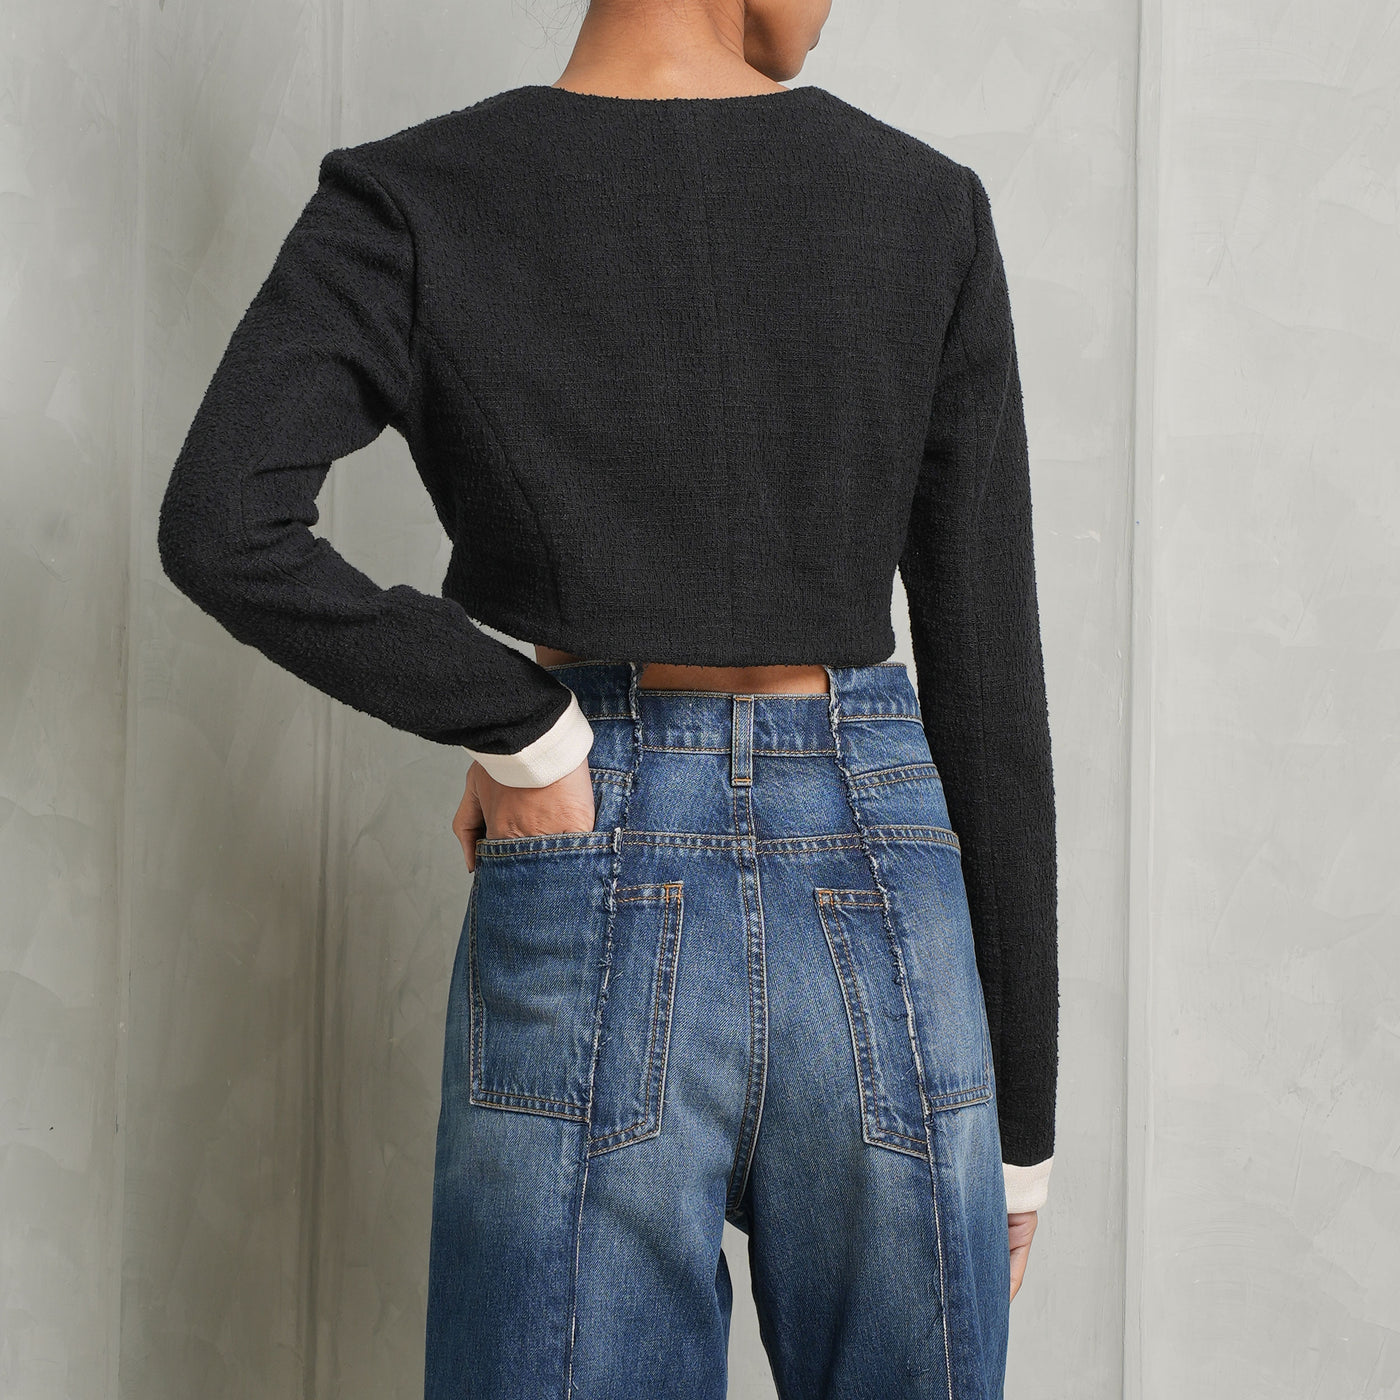 ALEXIS vernazza cropped cardigan long sleeve woolen